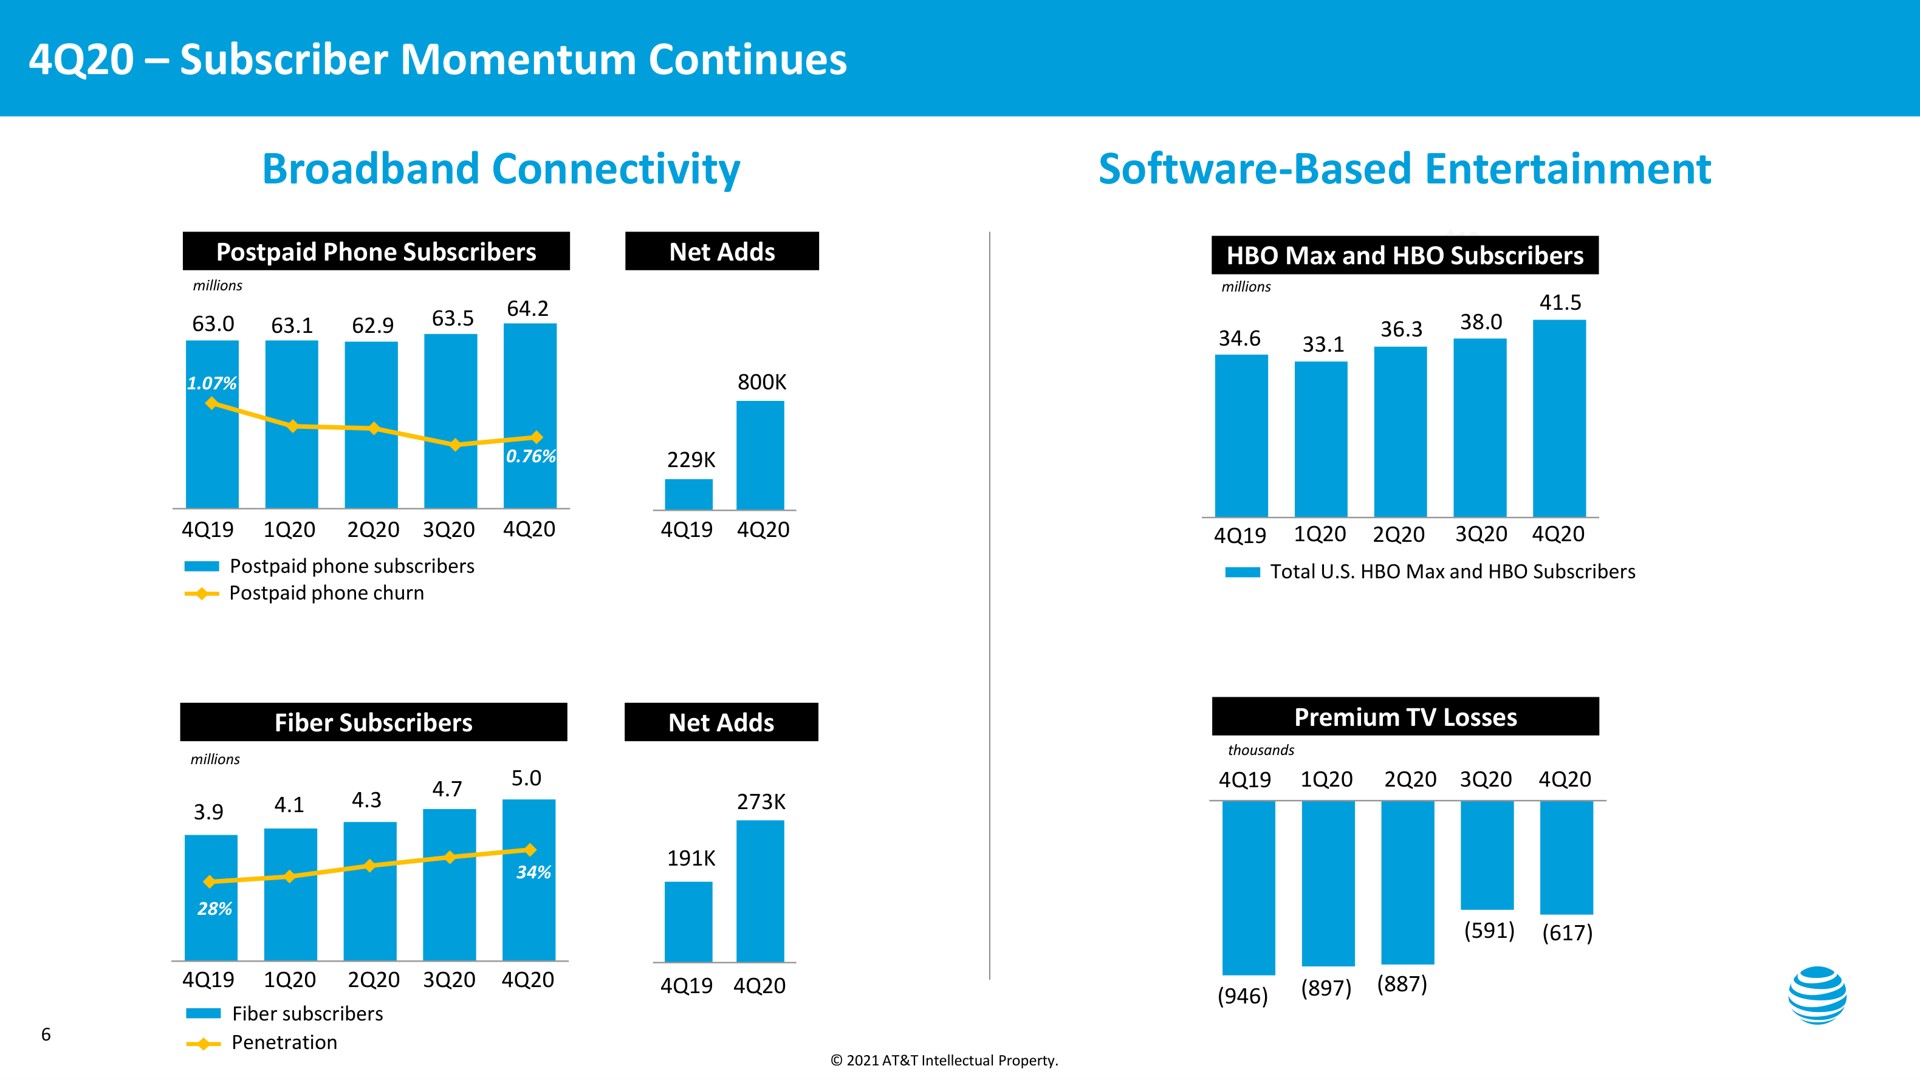 subscriber momentum continues connectivity based entertainment a | AT&T